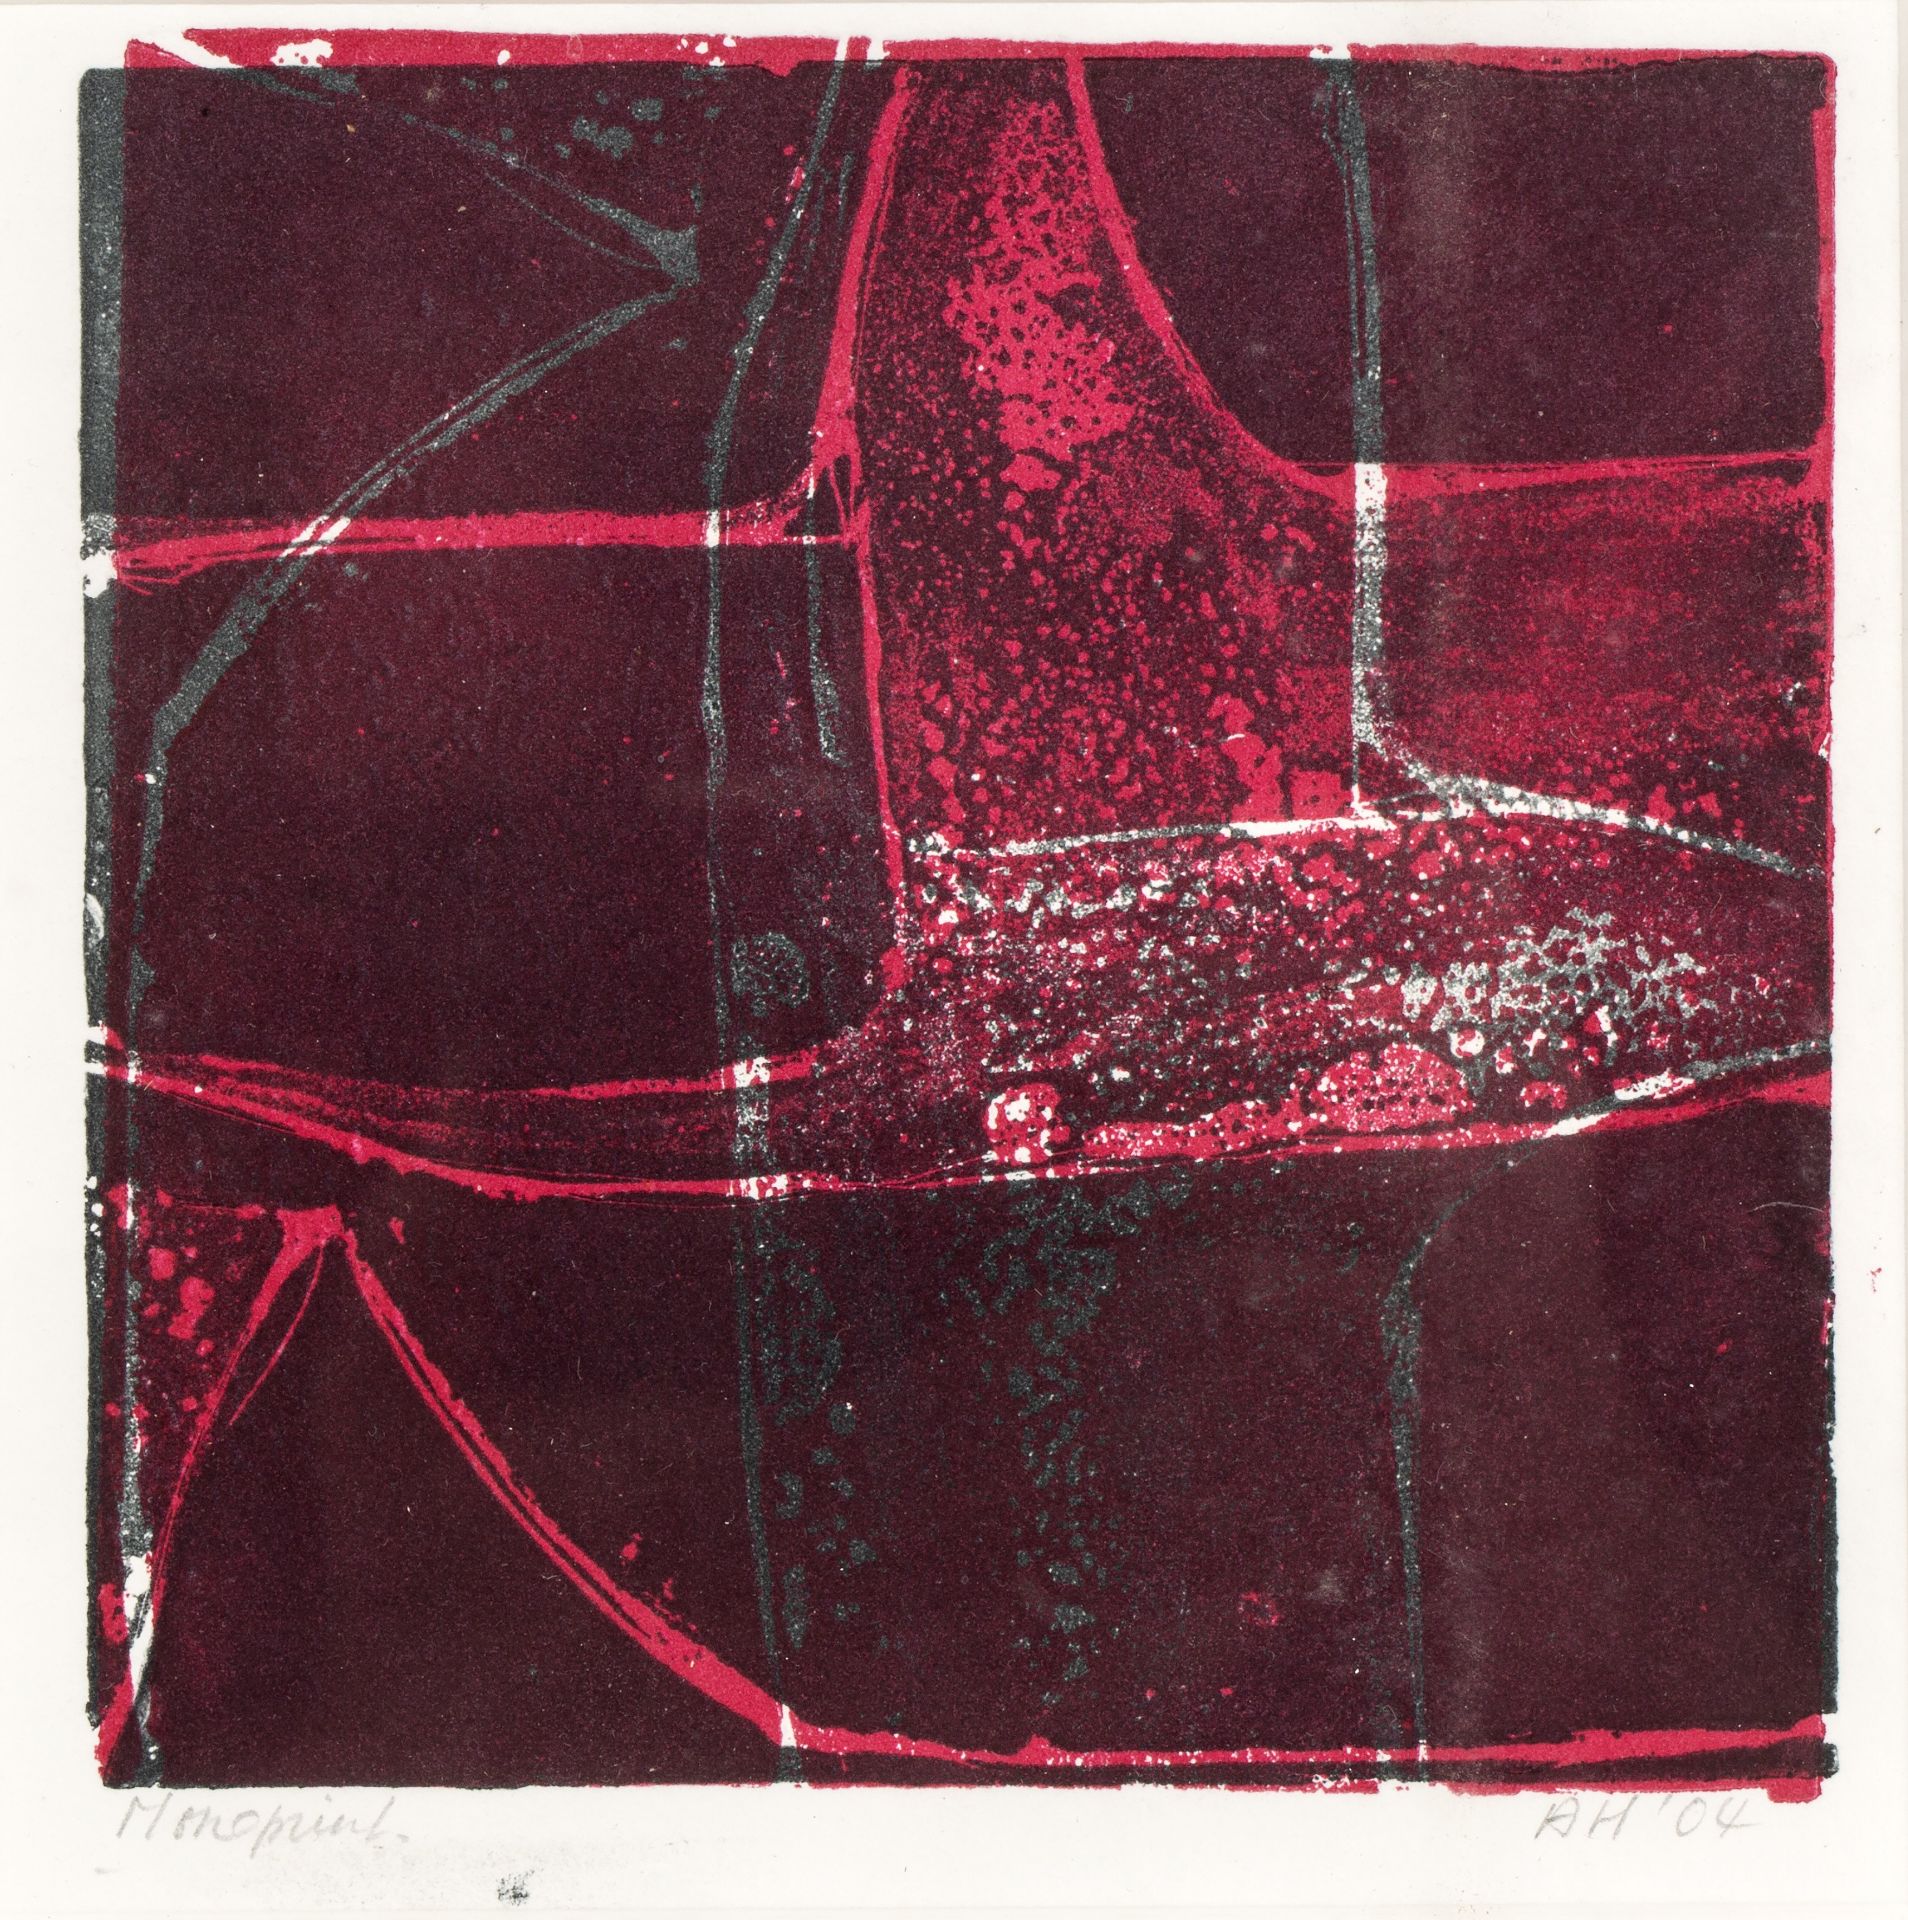 Annette H**** (Contemporary) 'Red abstract', monoprint, signed and dated 2004 in pencil lower right,